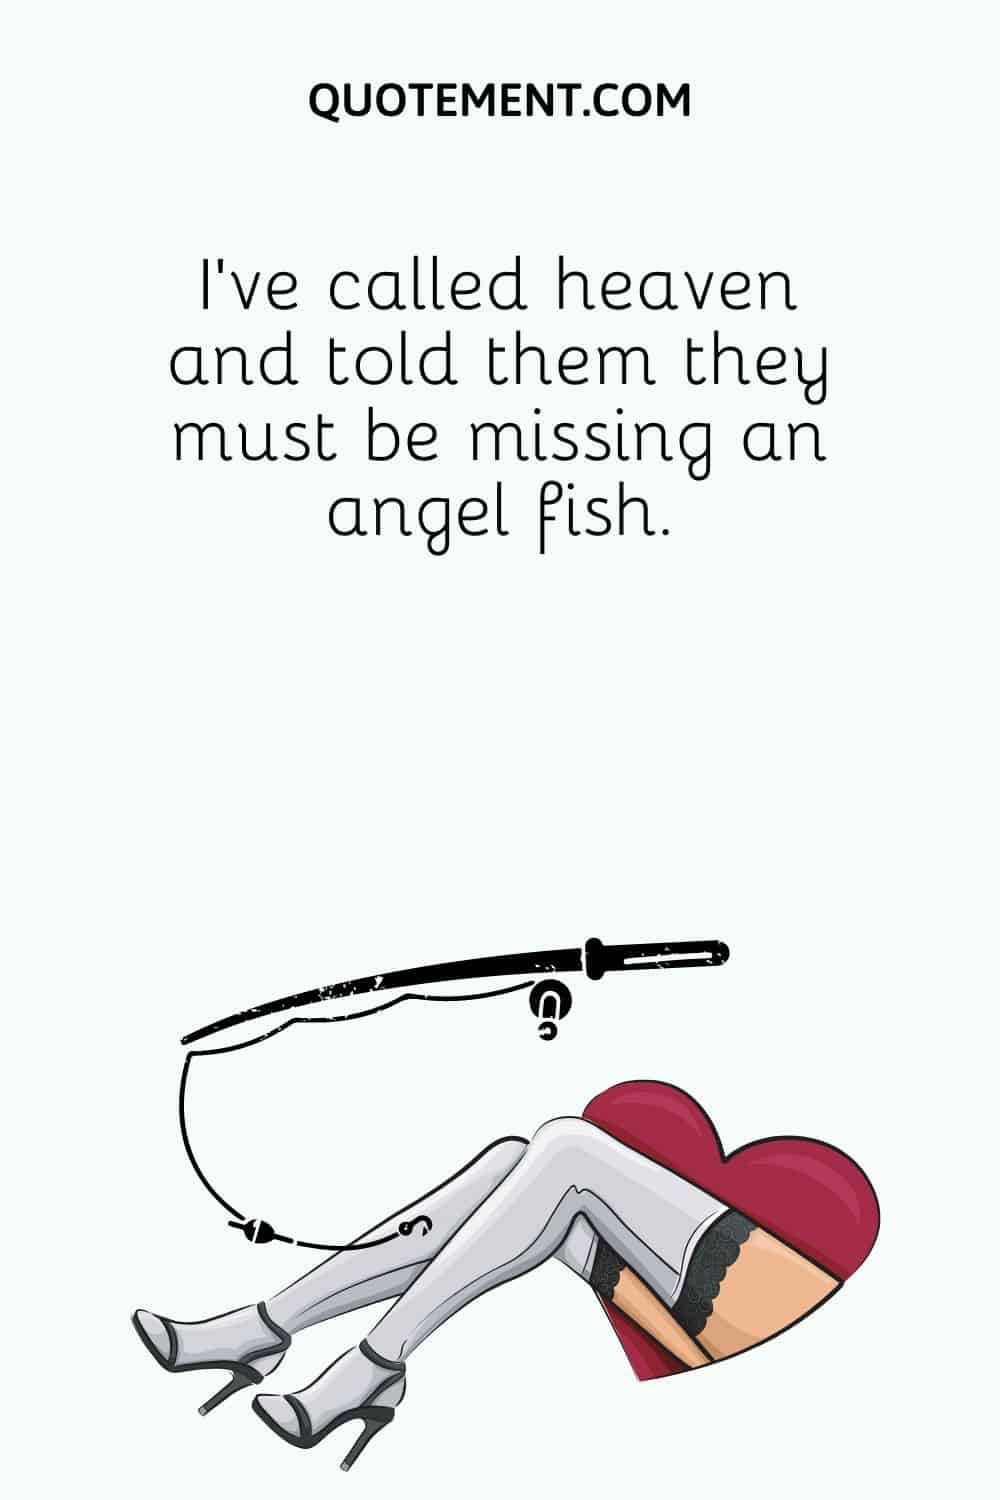 I've called heaven and told them they must be missing an angel fish